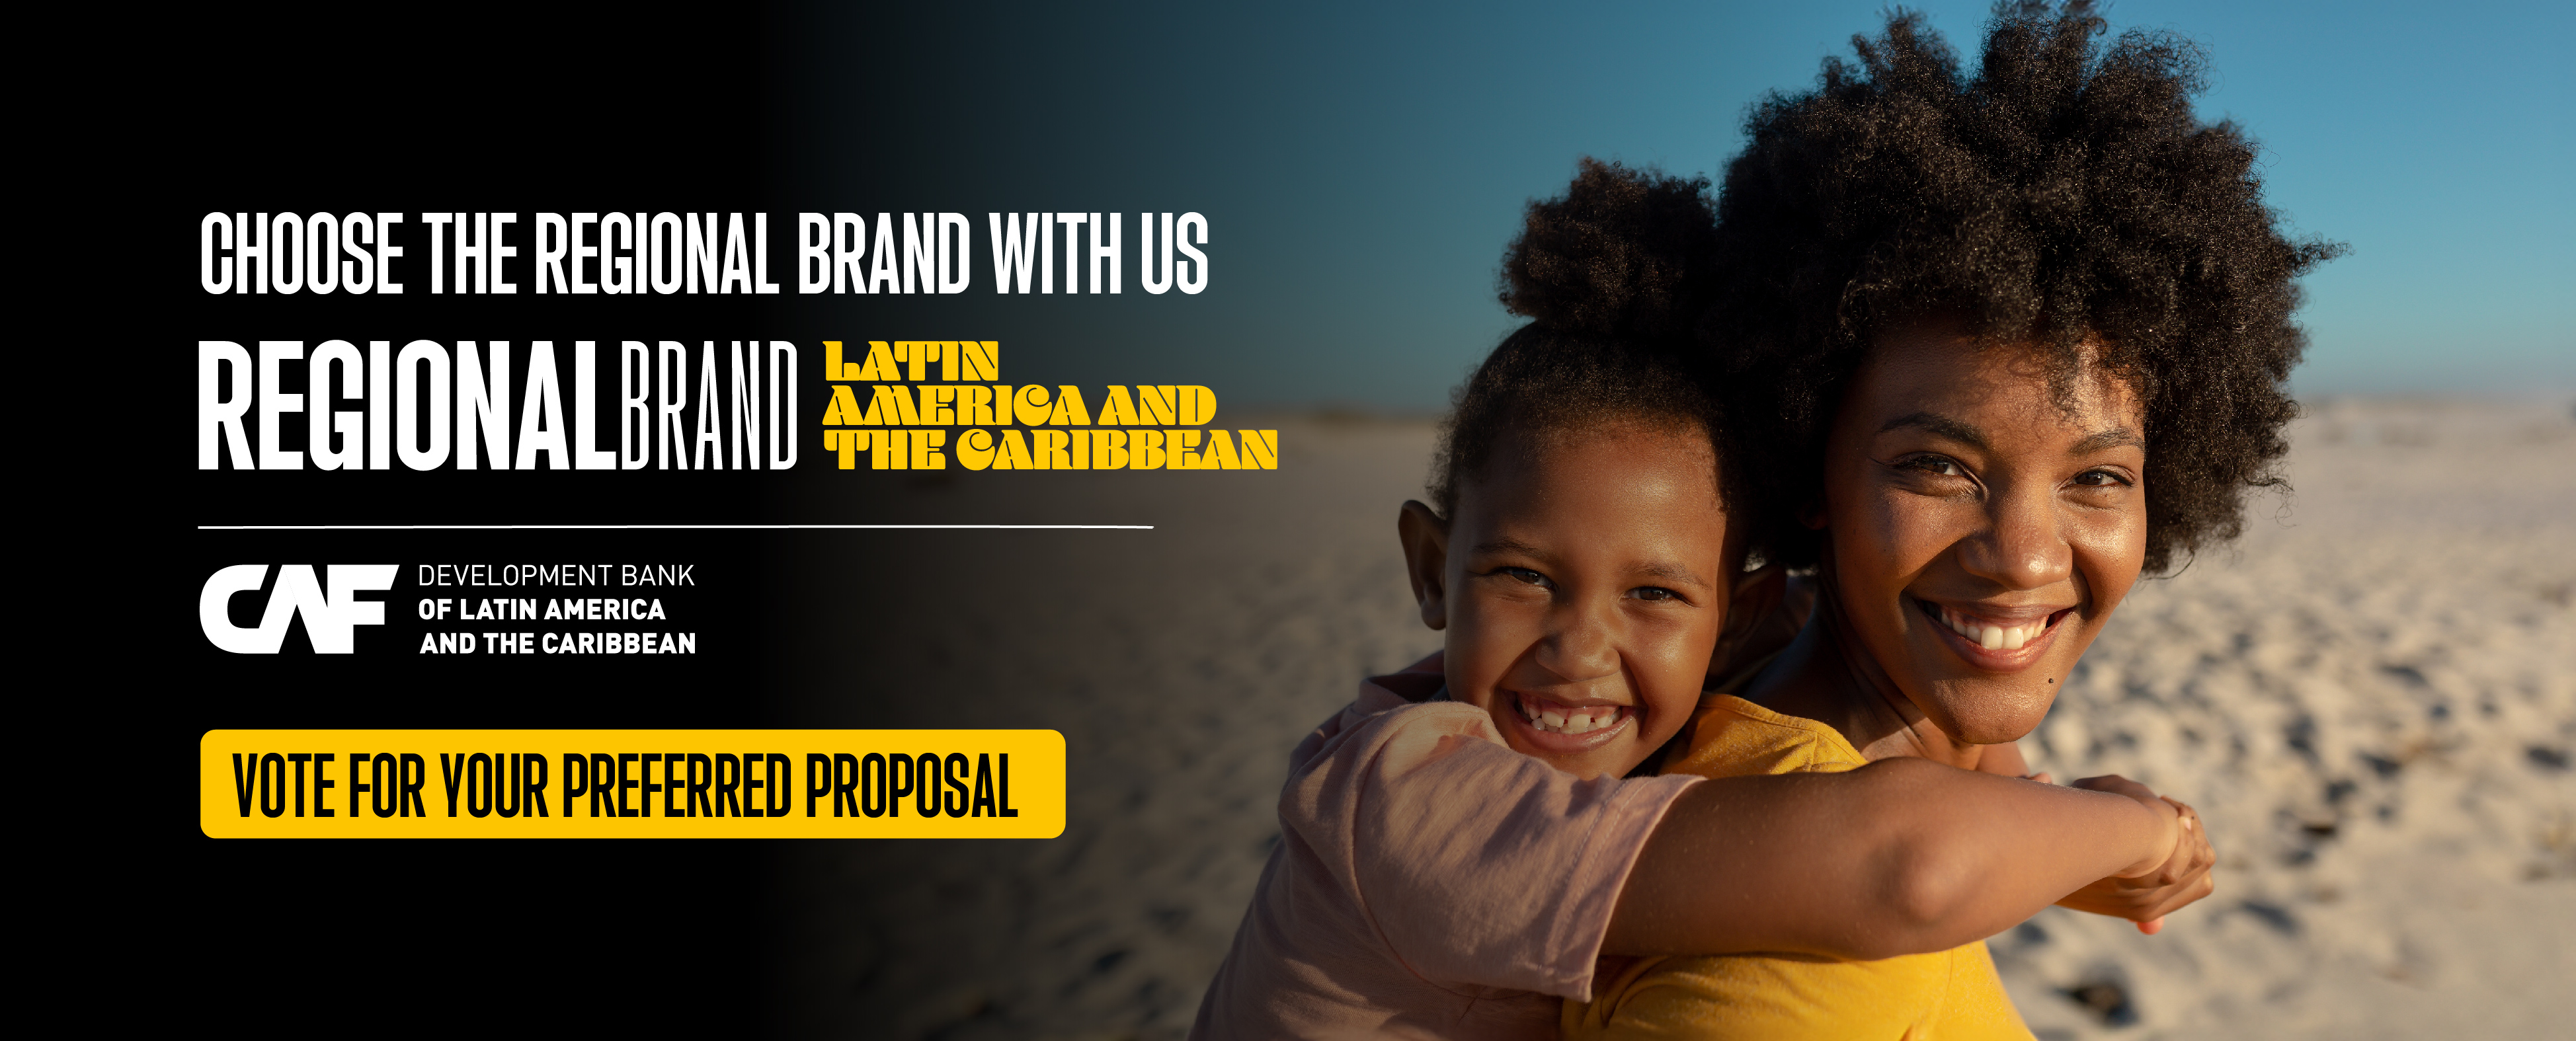 VOTE HERE and choose the Region Brand for Latam and the Caribbean